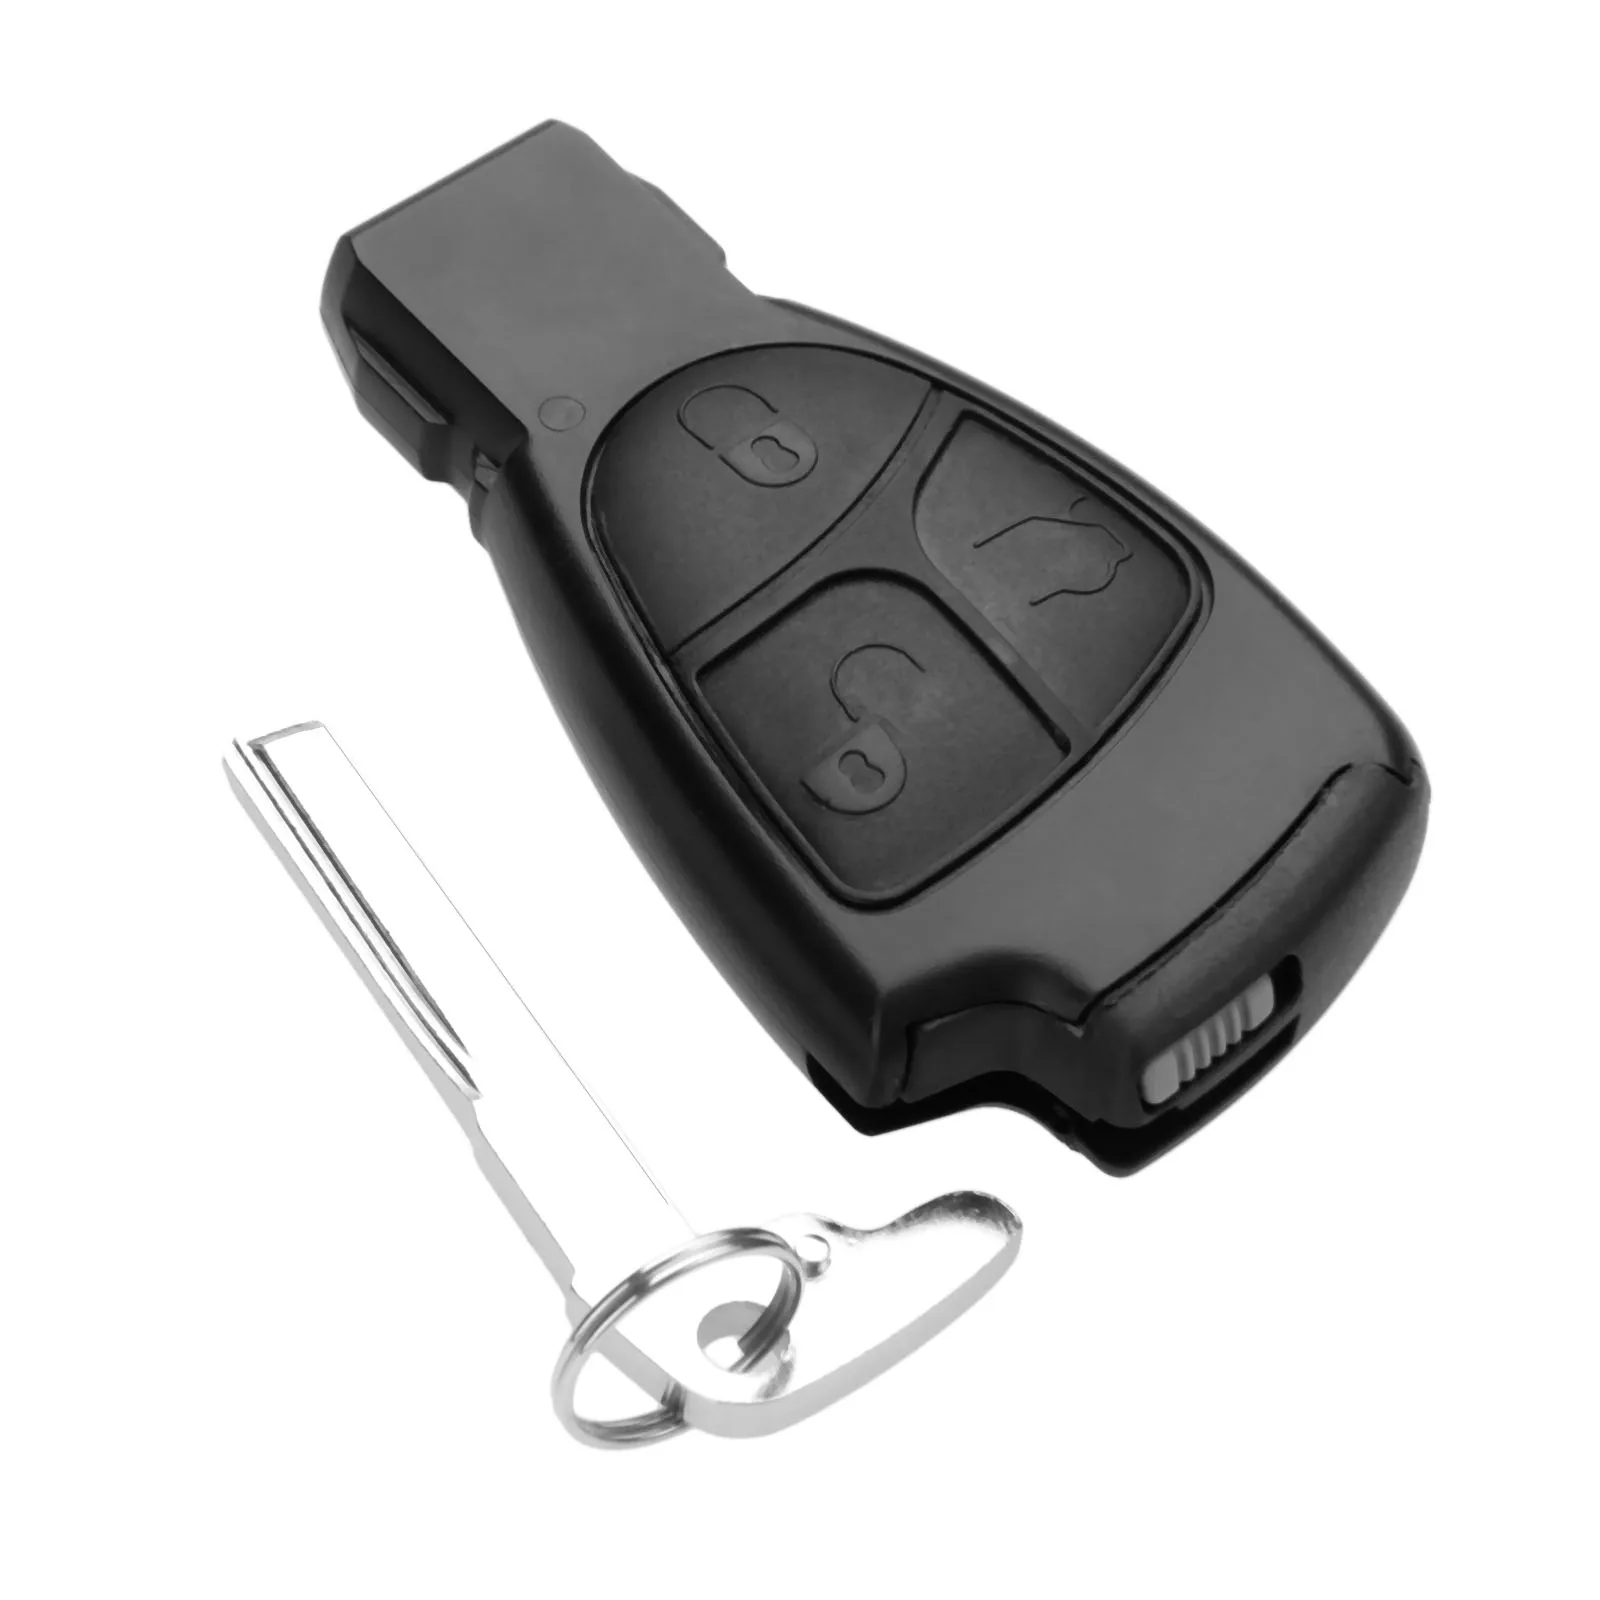 1Pc Remote Control Key Fob 3 Buttons 433.9 MHz 7941 Chip Fit For Mercedes Benz 